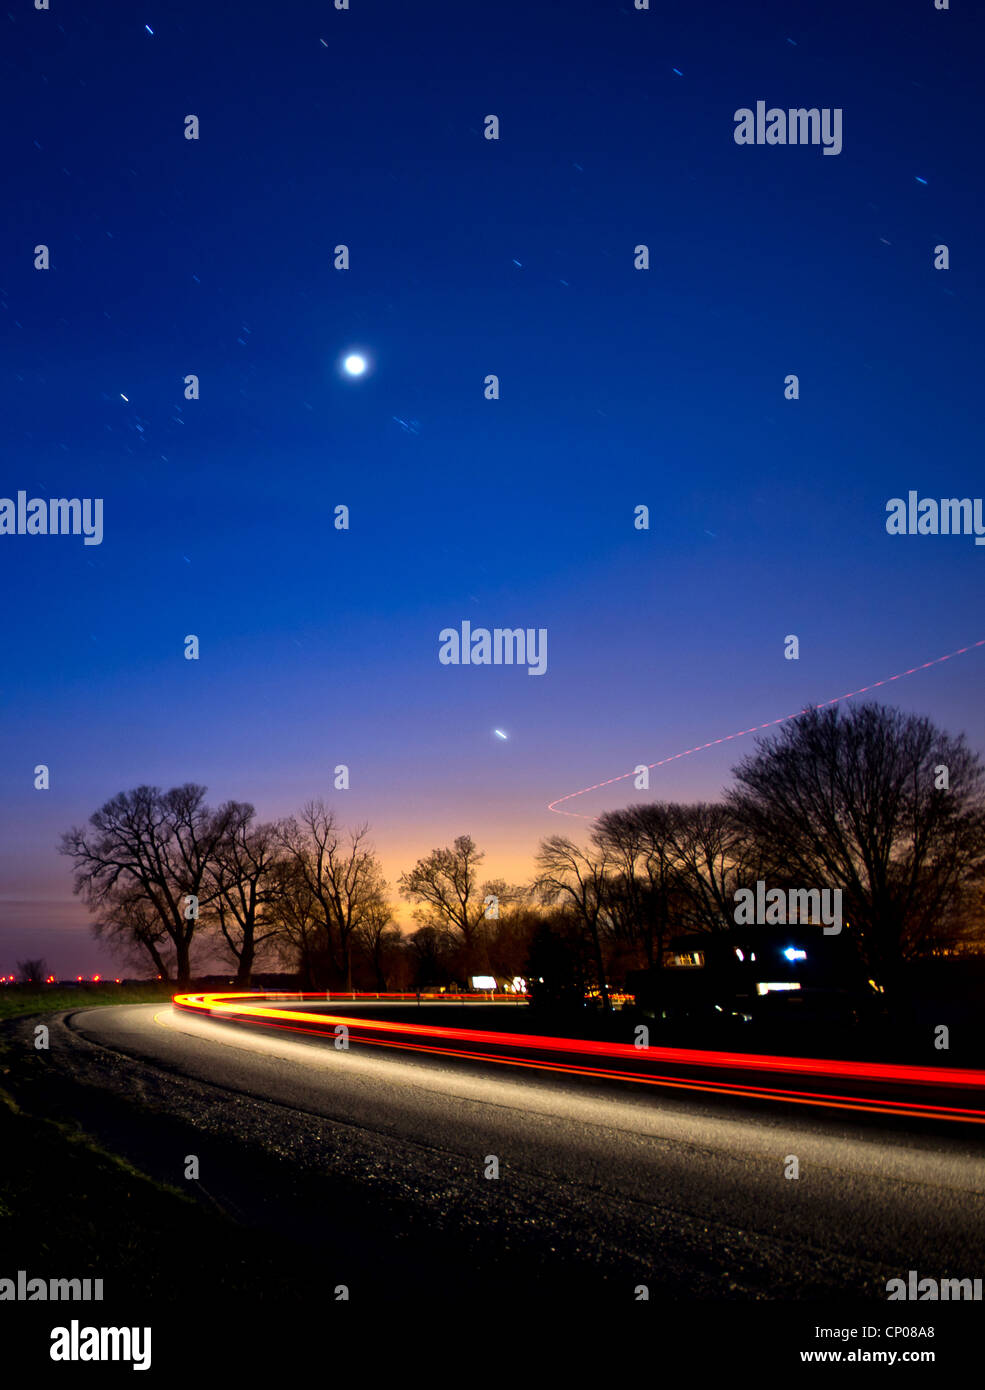 A car and plane making a curve at night under the stars and Venus. Stock Photo